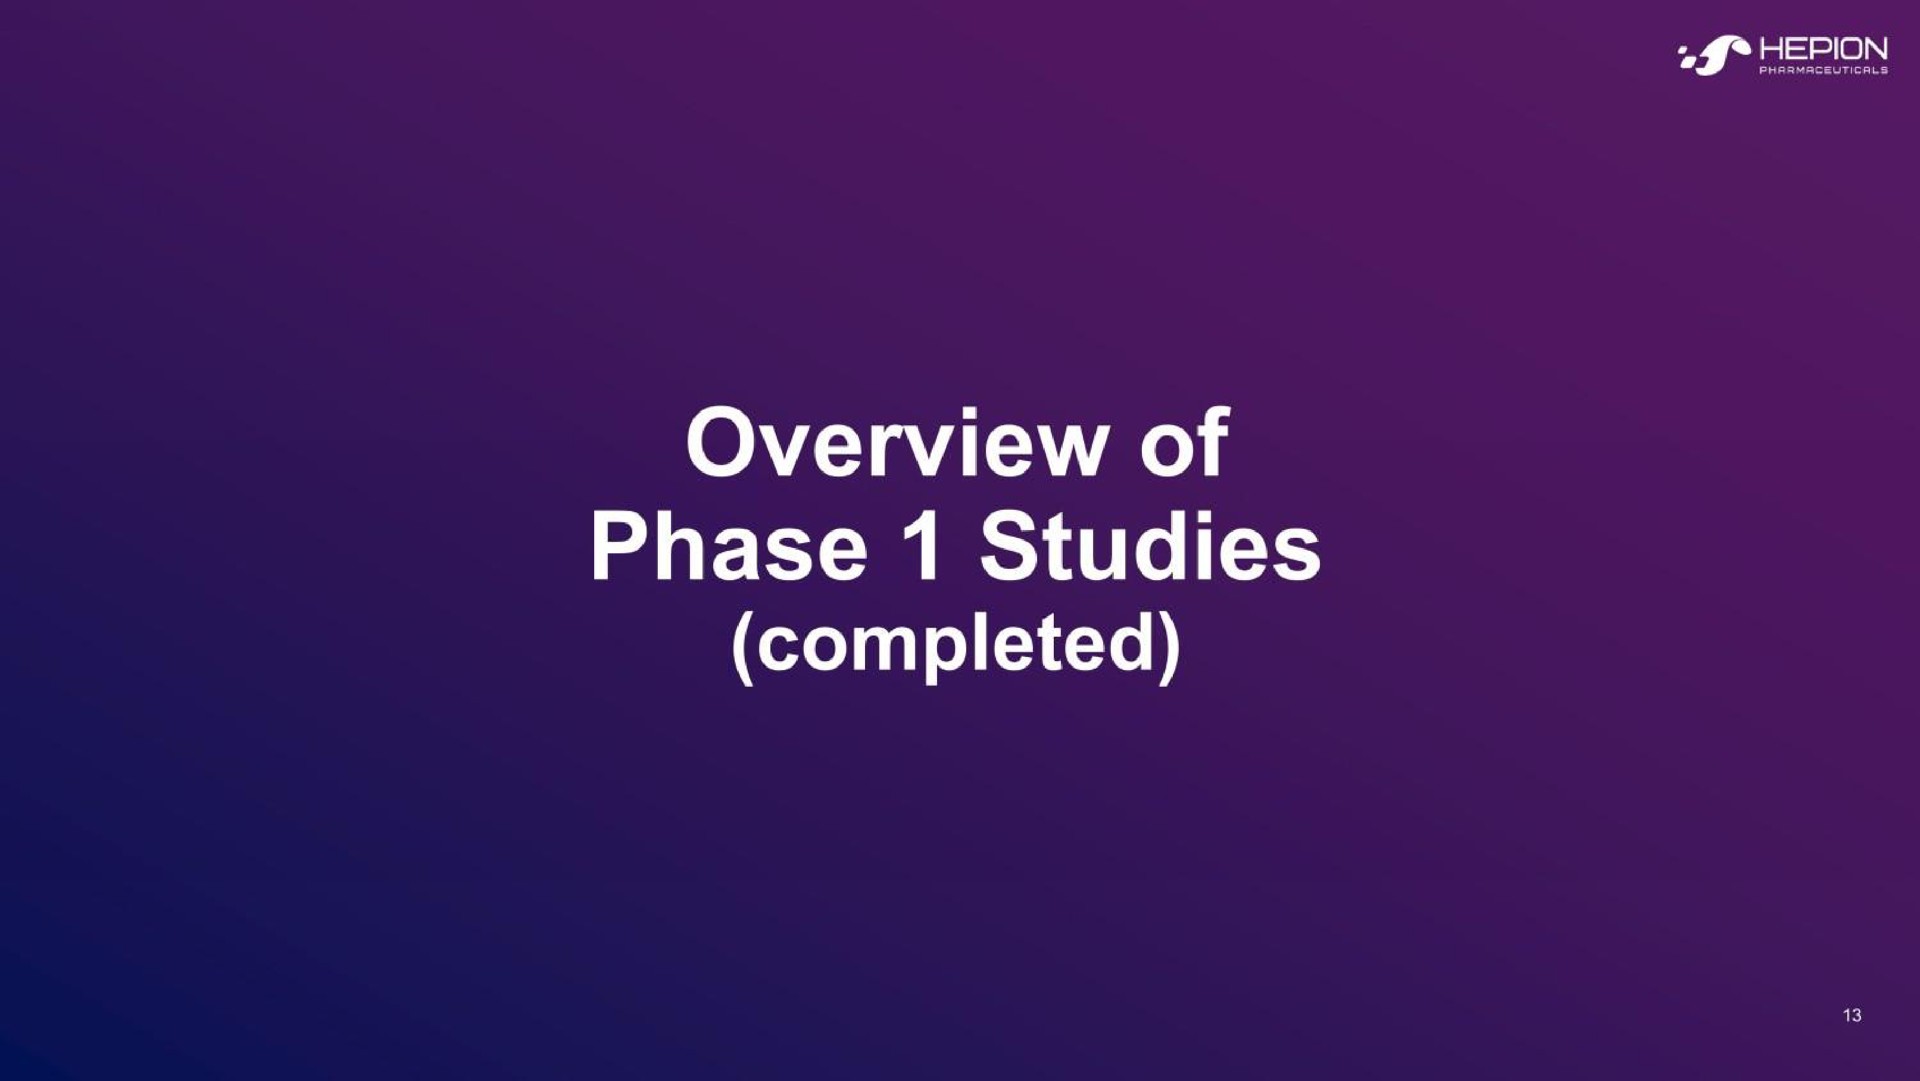 overview of phase studies completed | Hepion Pharmaceuticals